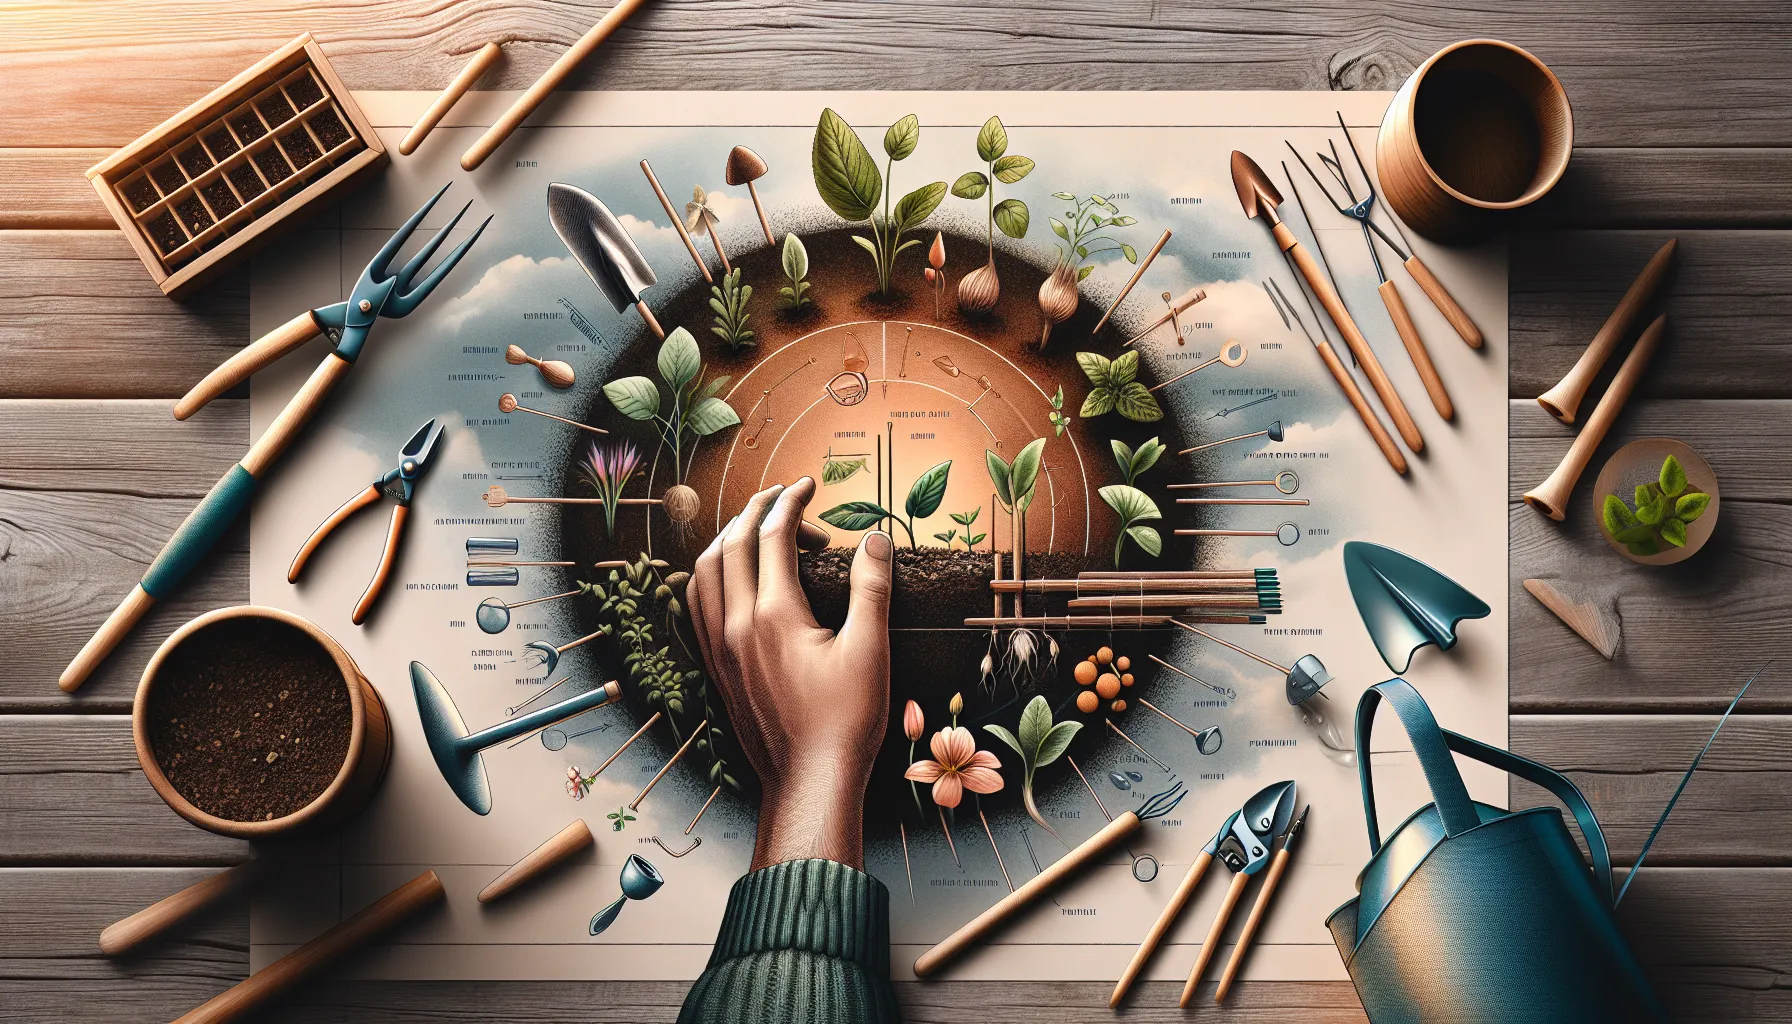 A person's hands arrange tools and plants on a poster with beginner gardening tips, surrounded by real gardening equipment on a wooden surface.